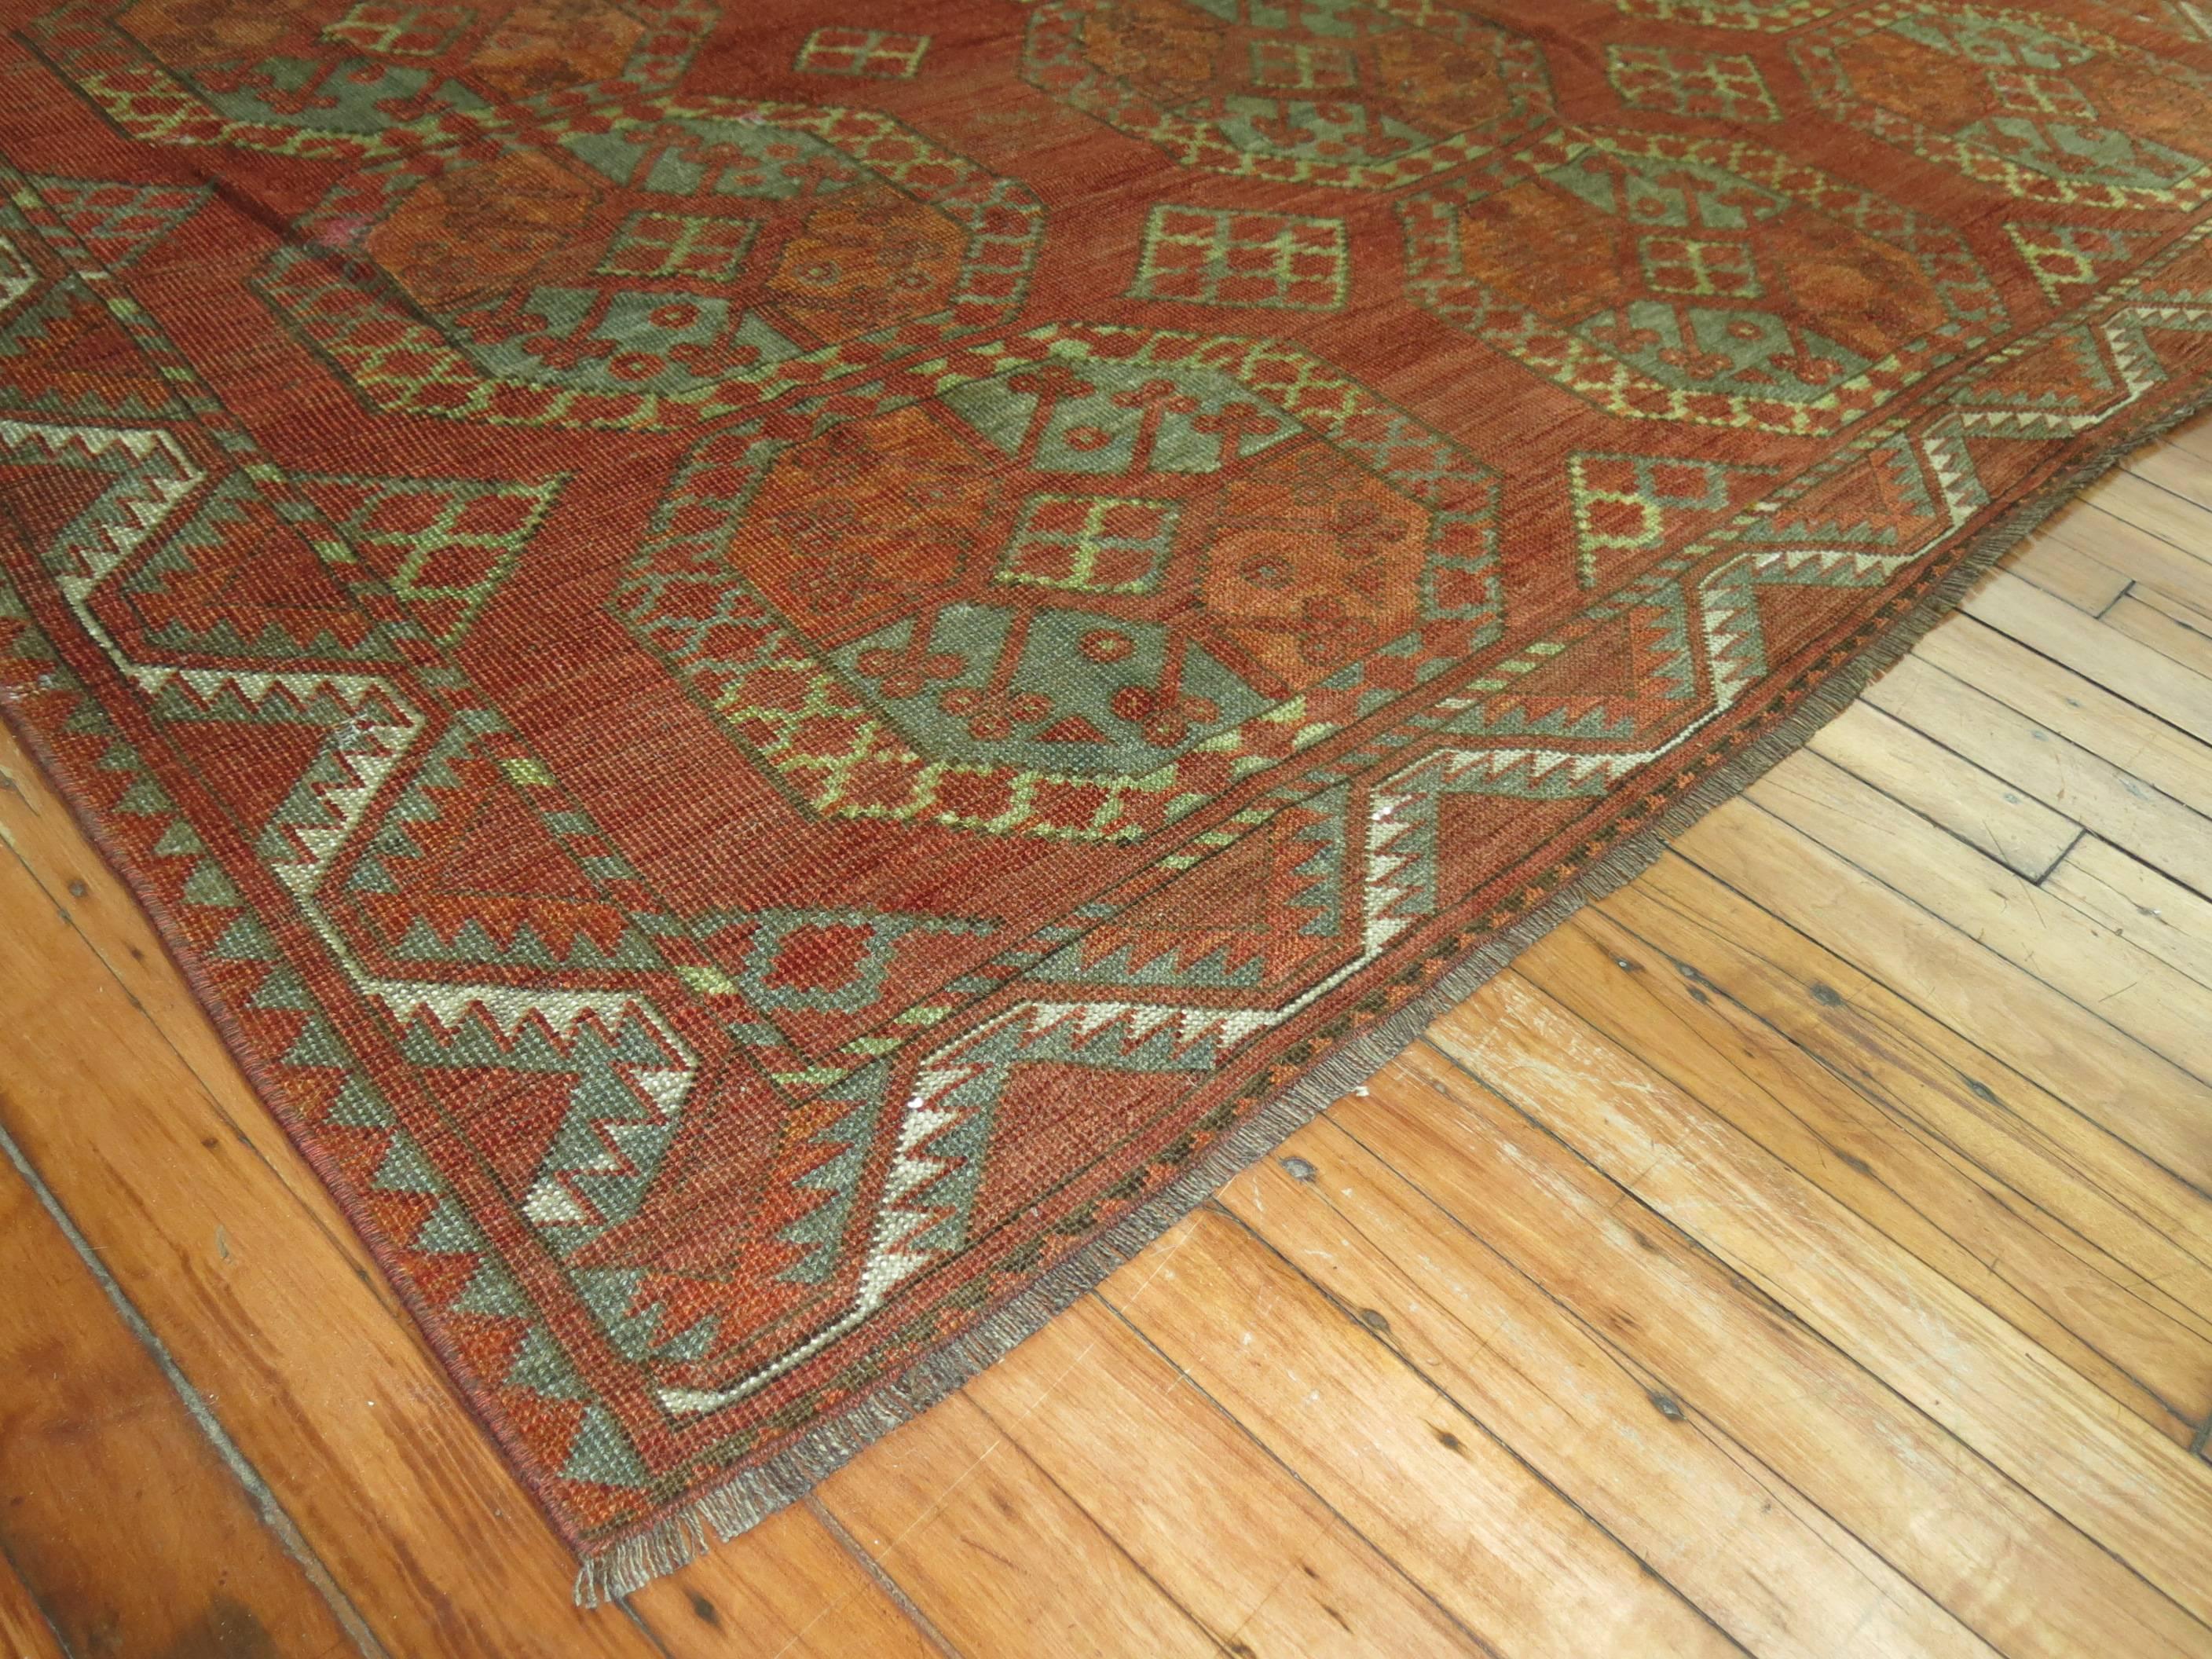 A late 19th century antique Ersari carpet in predominant browns, terracotta's and teal.

Size: 6'9